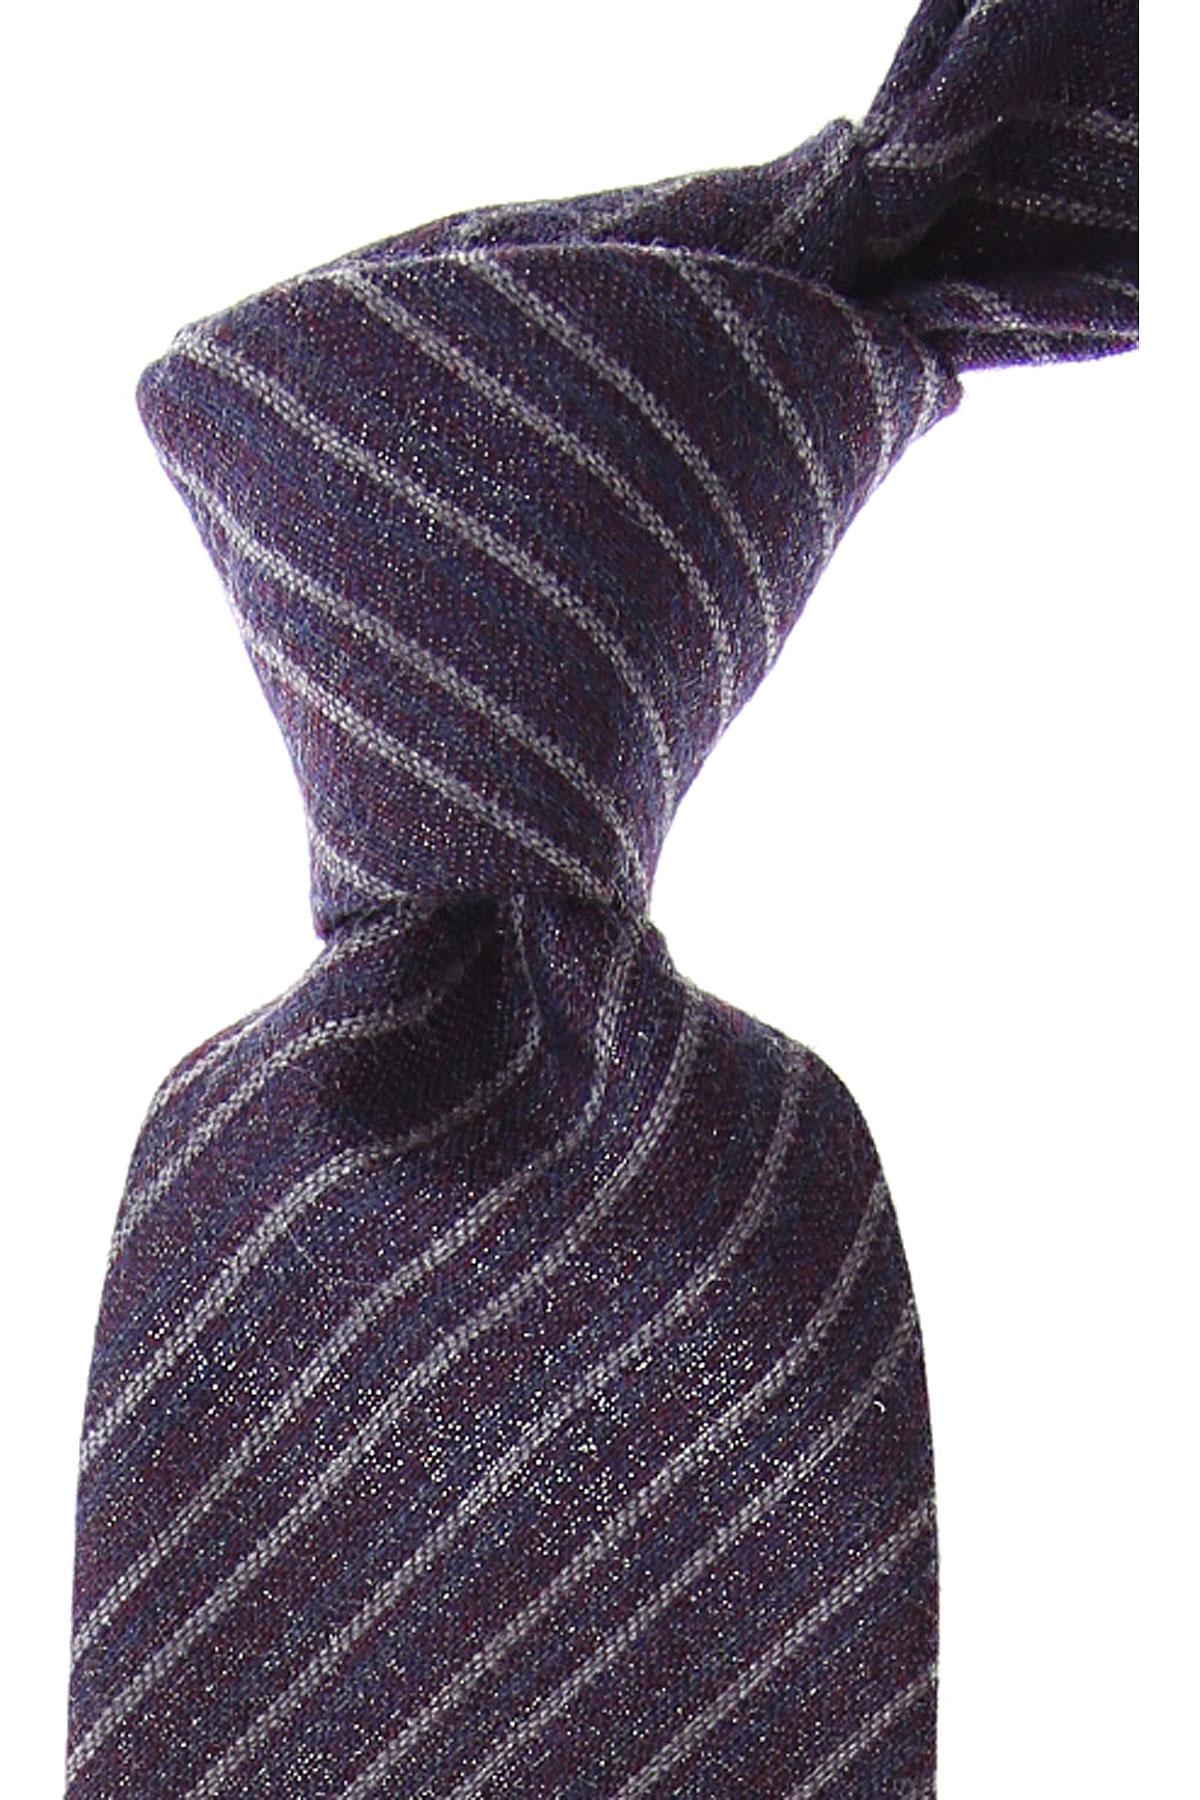 Moschino Silk Ties On Sale in Purple for Men - Lyst